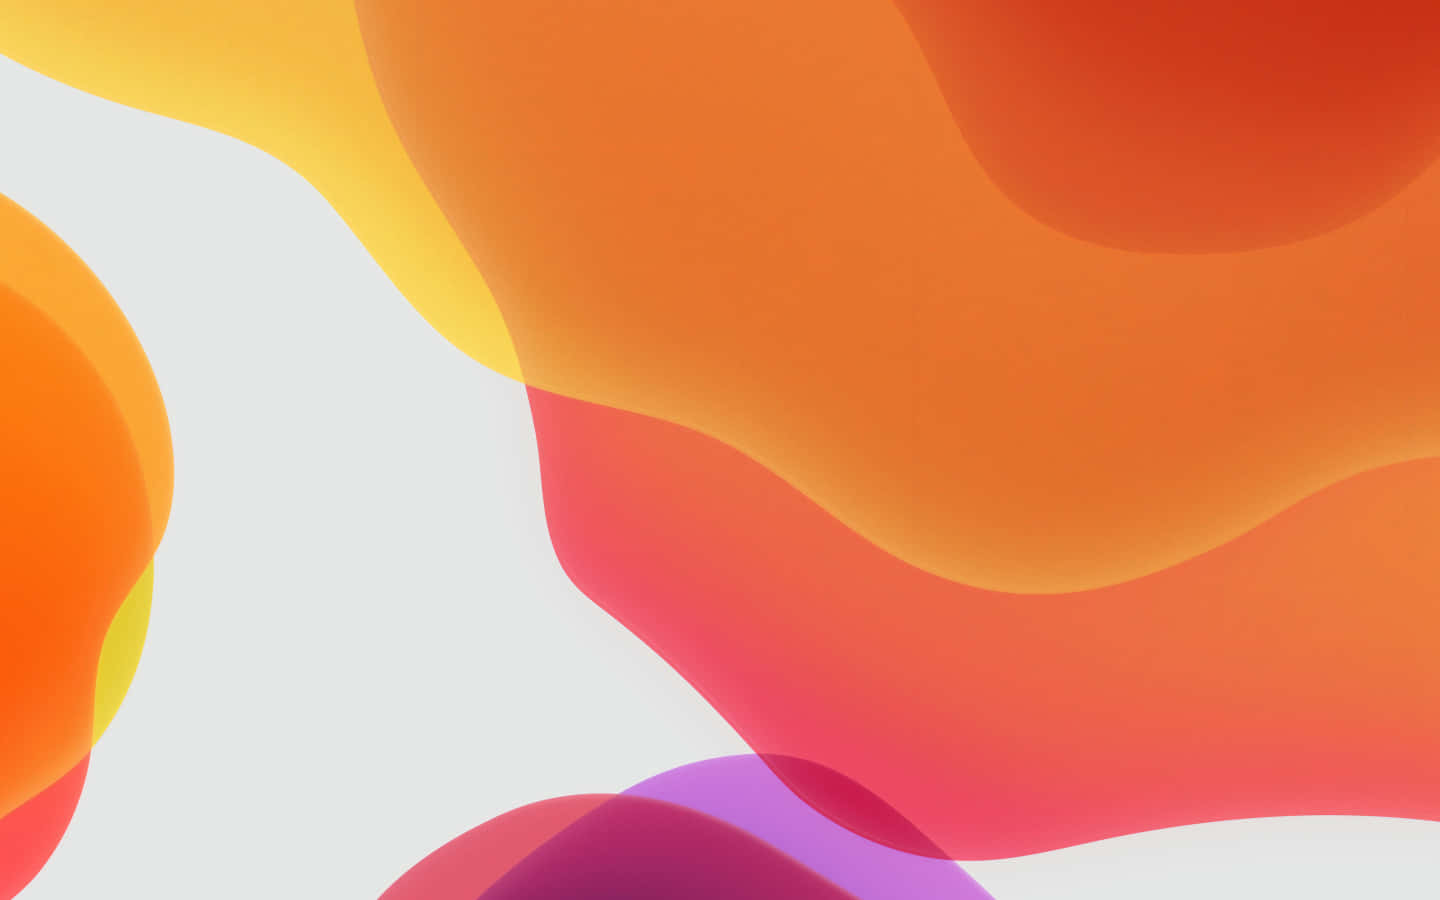 Download An Abstract Background With Colorful Shapes | Wallpapers.com